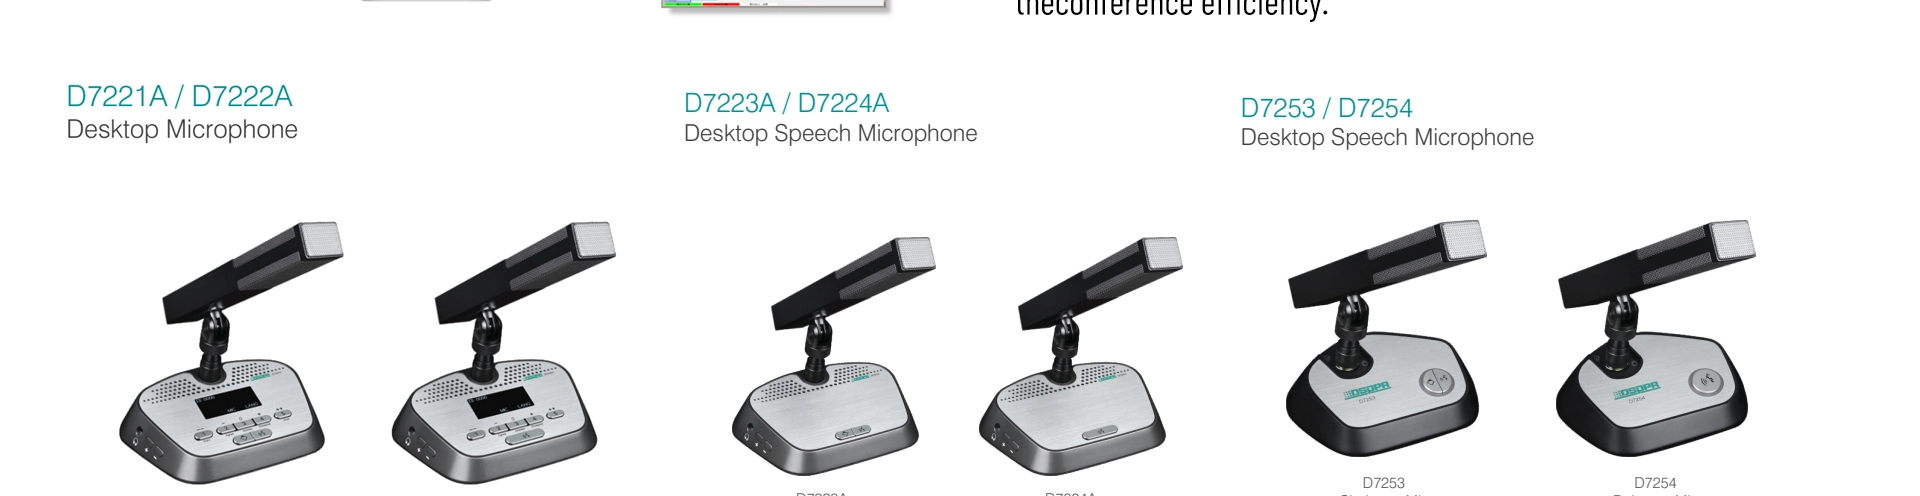 Digital Desktop Conference System Chairman Chairman Discussion Microphones